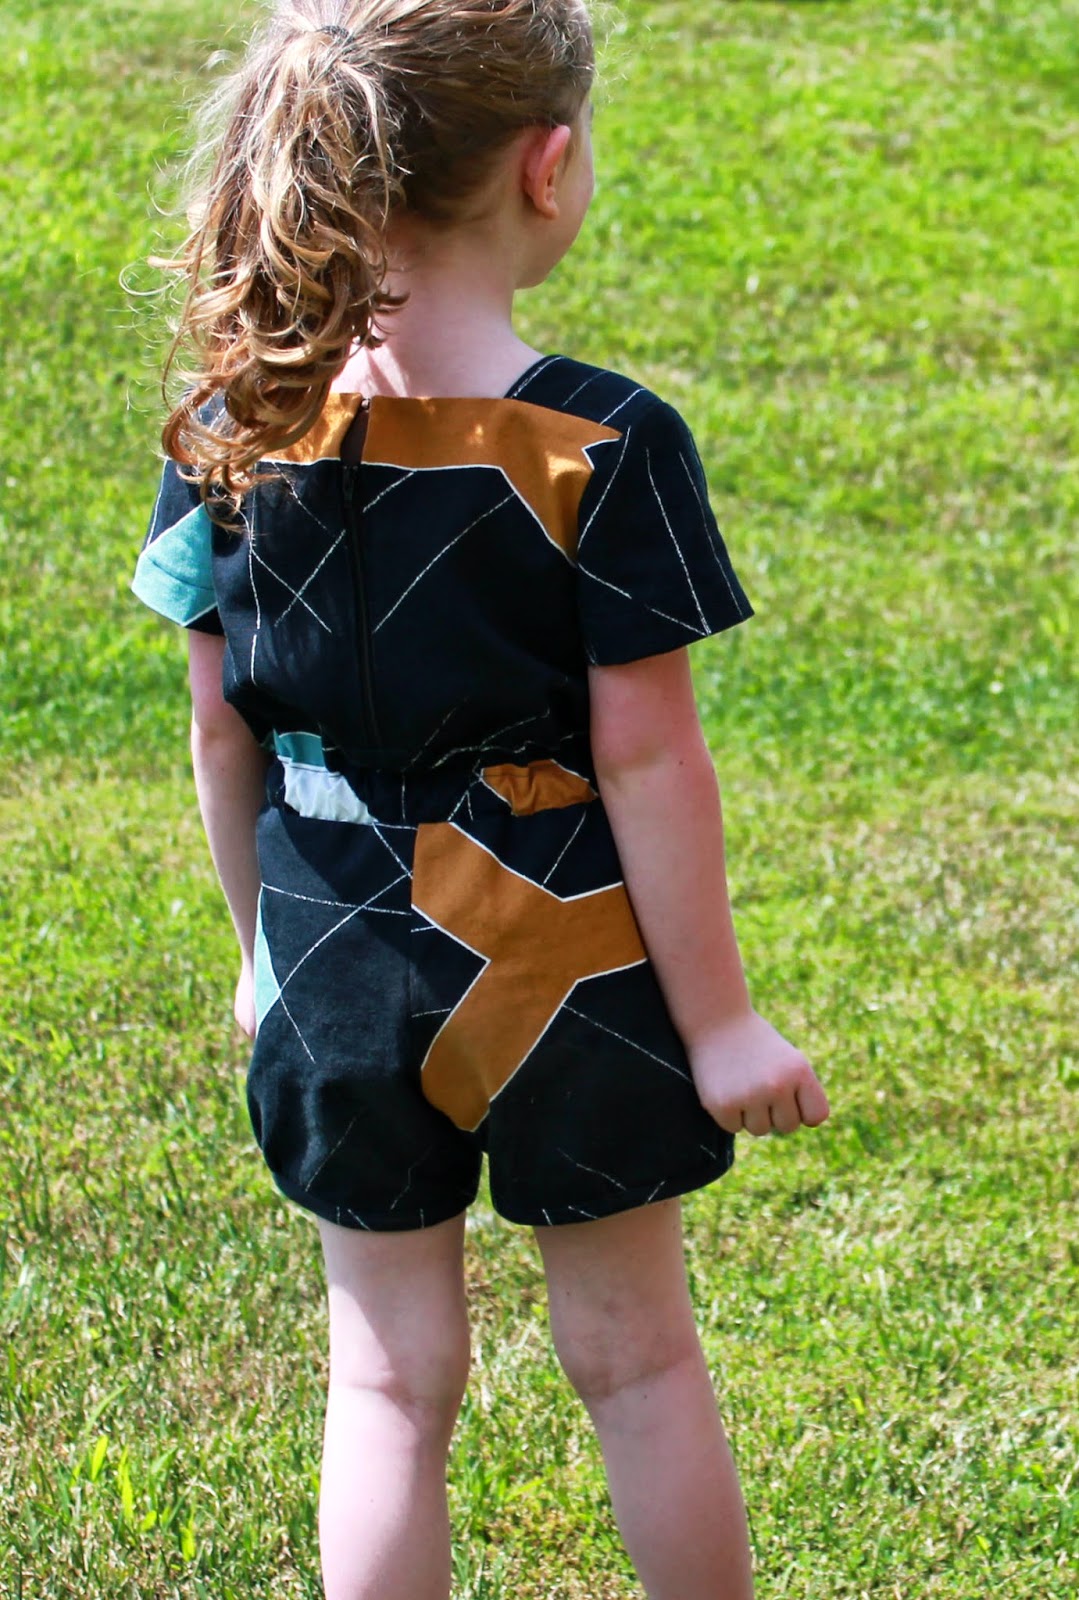 Oliver + S Croquet Dress + Puppet Show Shorts = Mash-Up Romper | The Inspired Wren